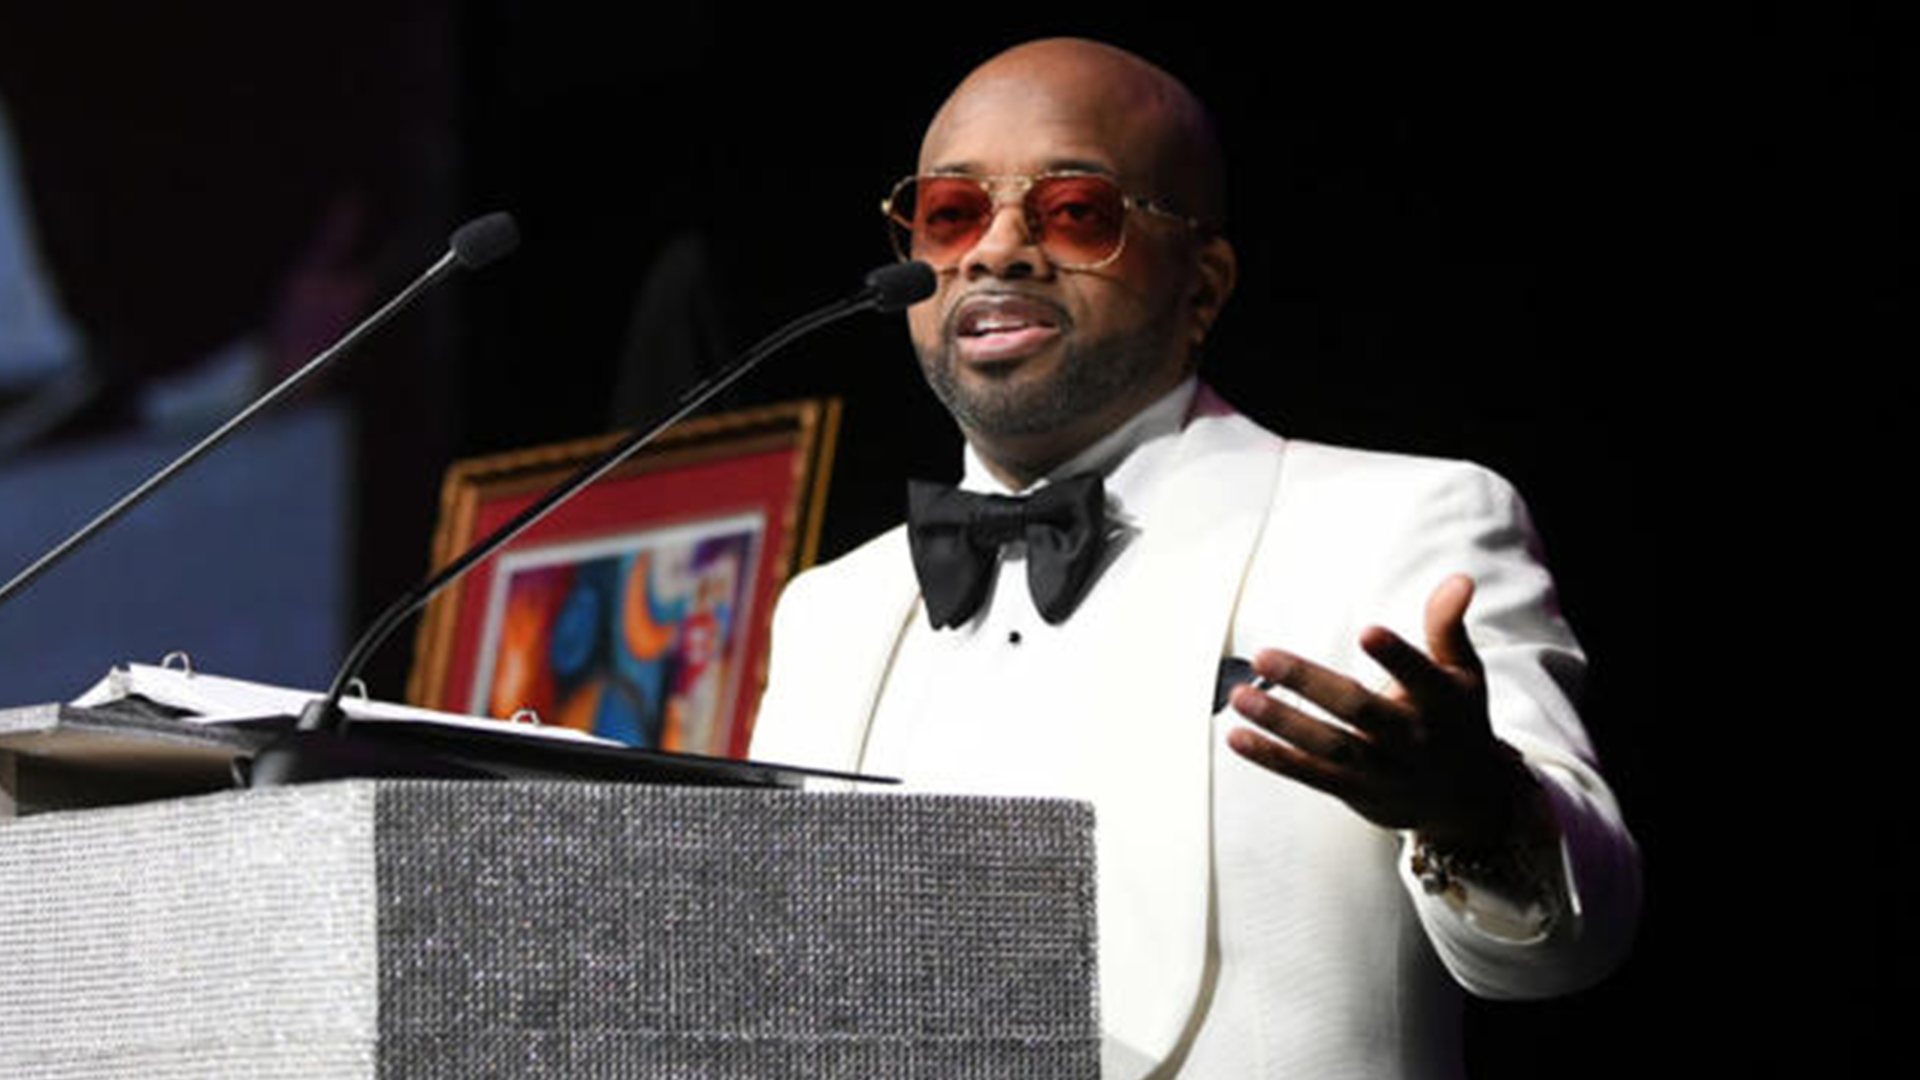 Jermaine Dupri To Earn An Honorary Doctor Of Fine Arts Degree For His Influence In The Music Industry